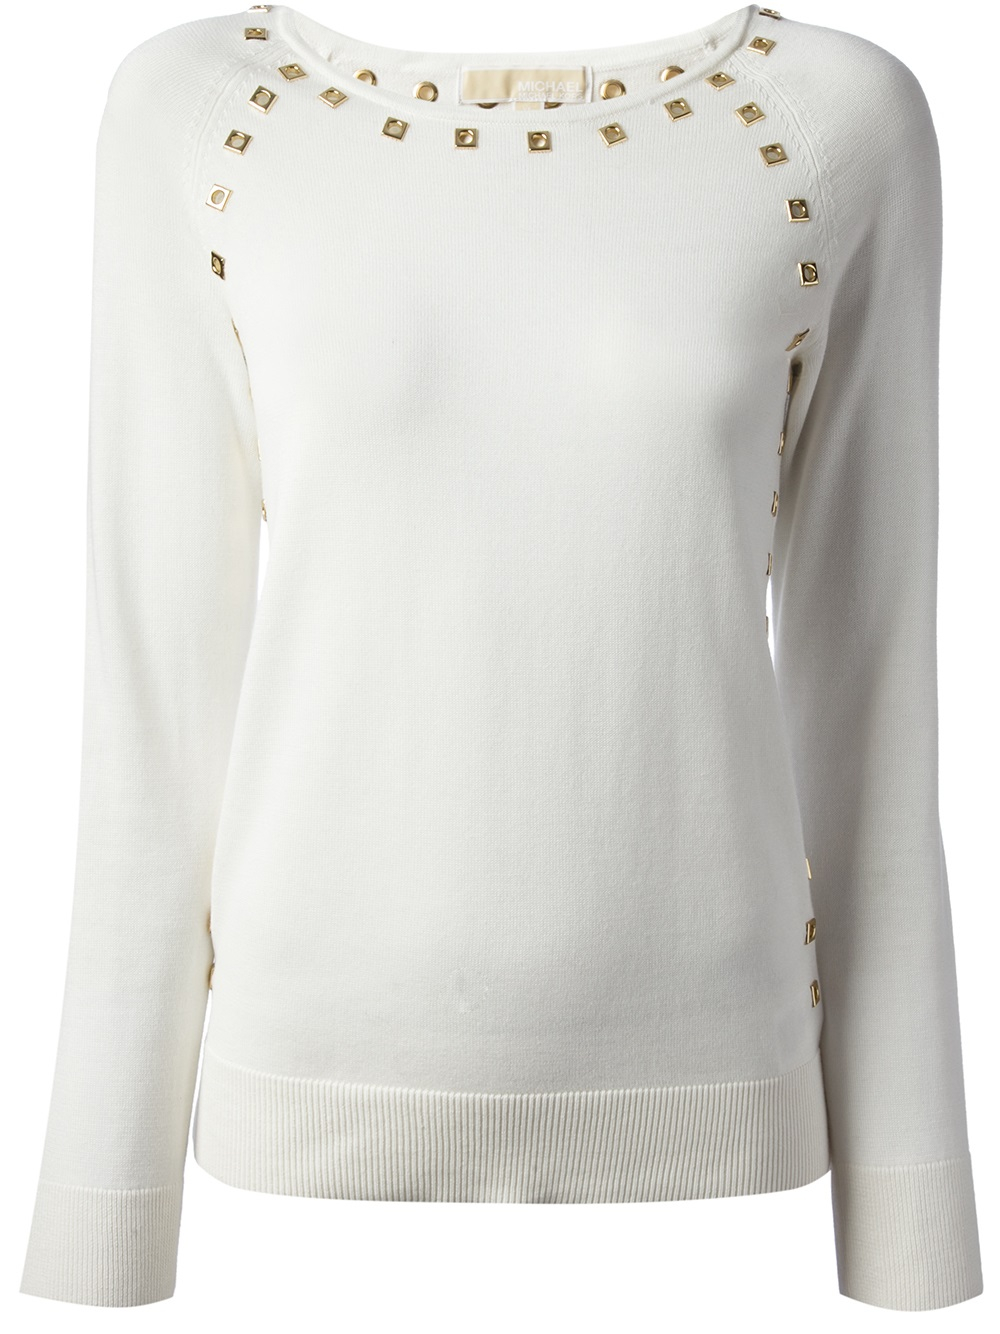 Lyst - Michael Michael Kors Studded Sweater in White